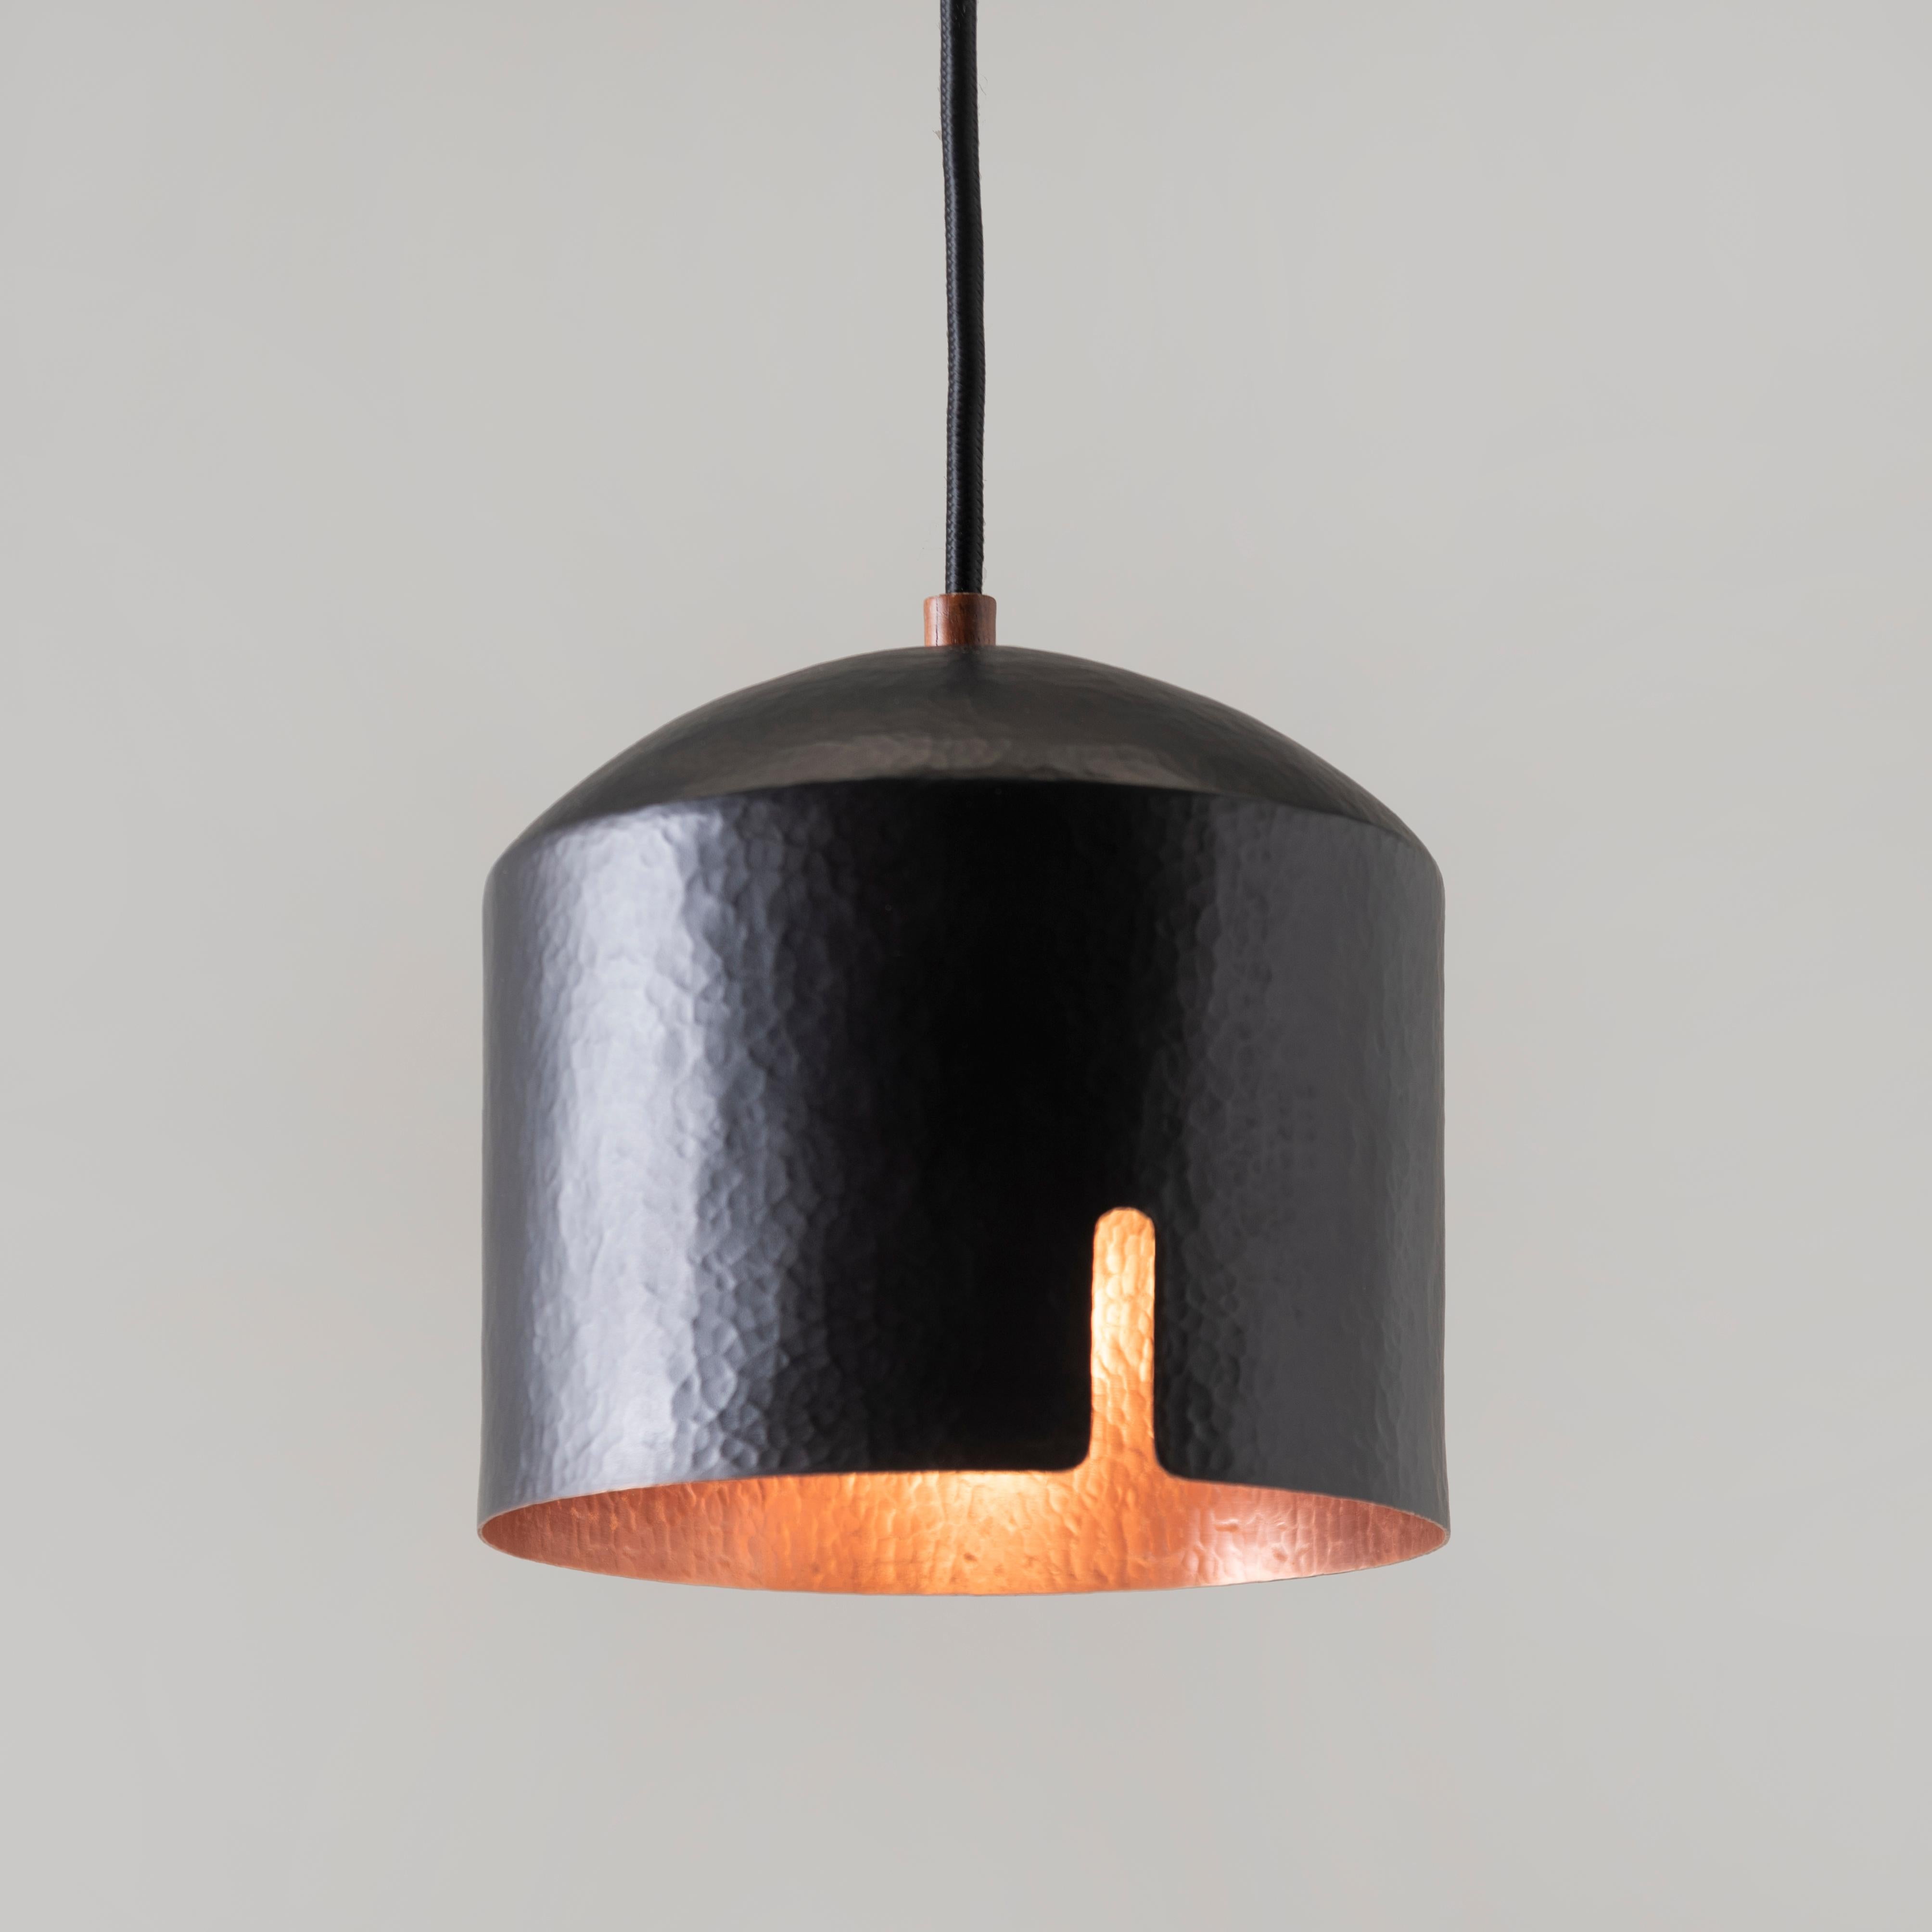 Hammered Copper Pendant Lamp Model B In New Condition For Sale In Zapopan, Jalisco. CP